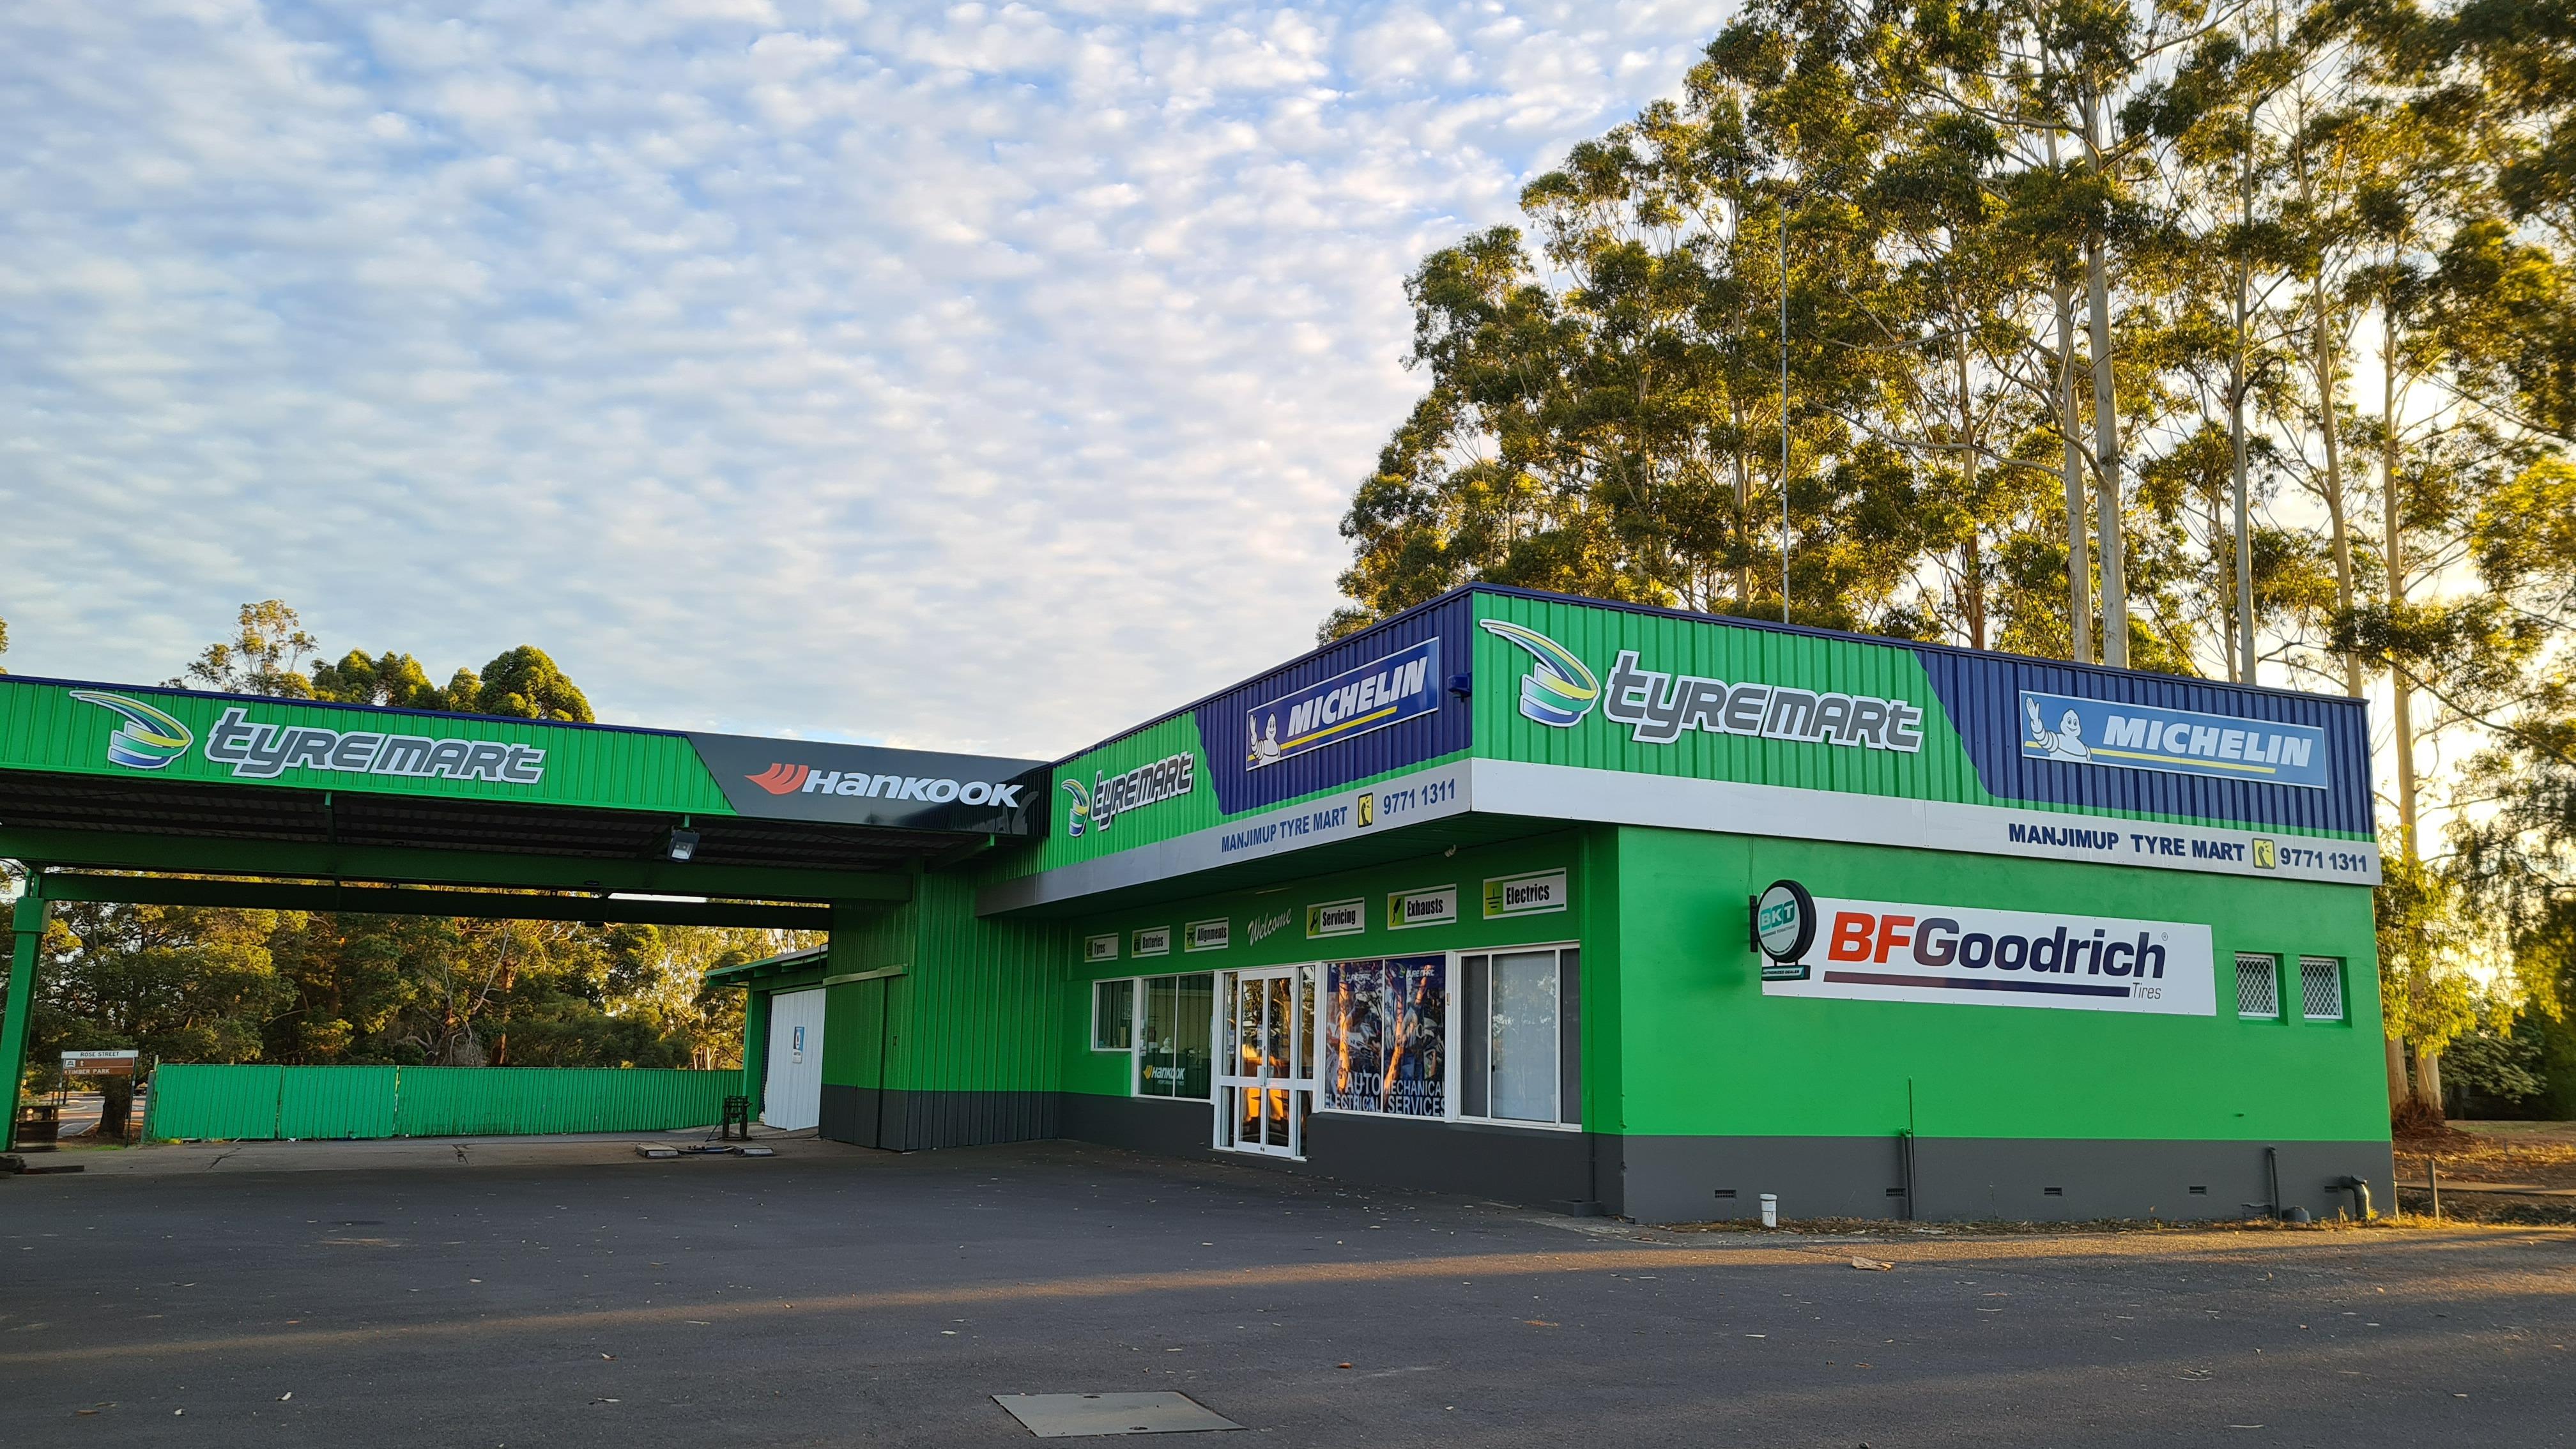 Manjimup Tyre Mart & Auto Electrical Services Manjimup (08) 9771 1311